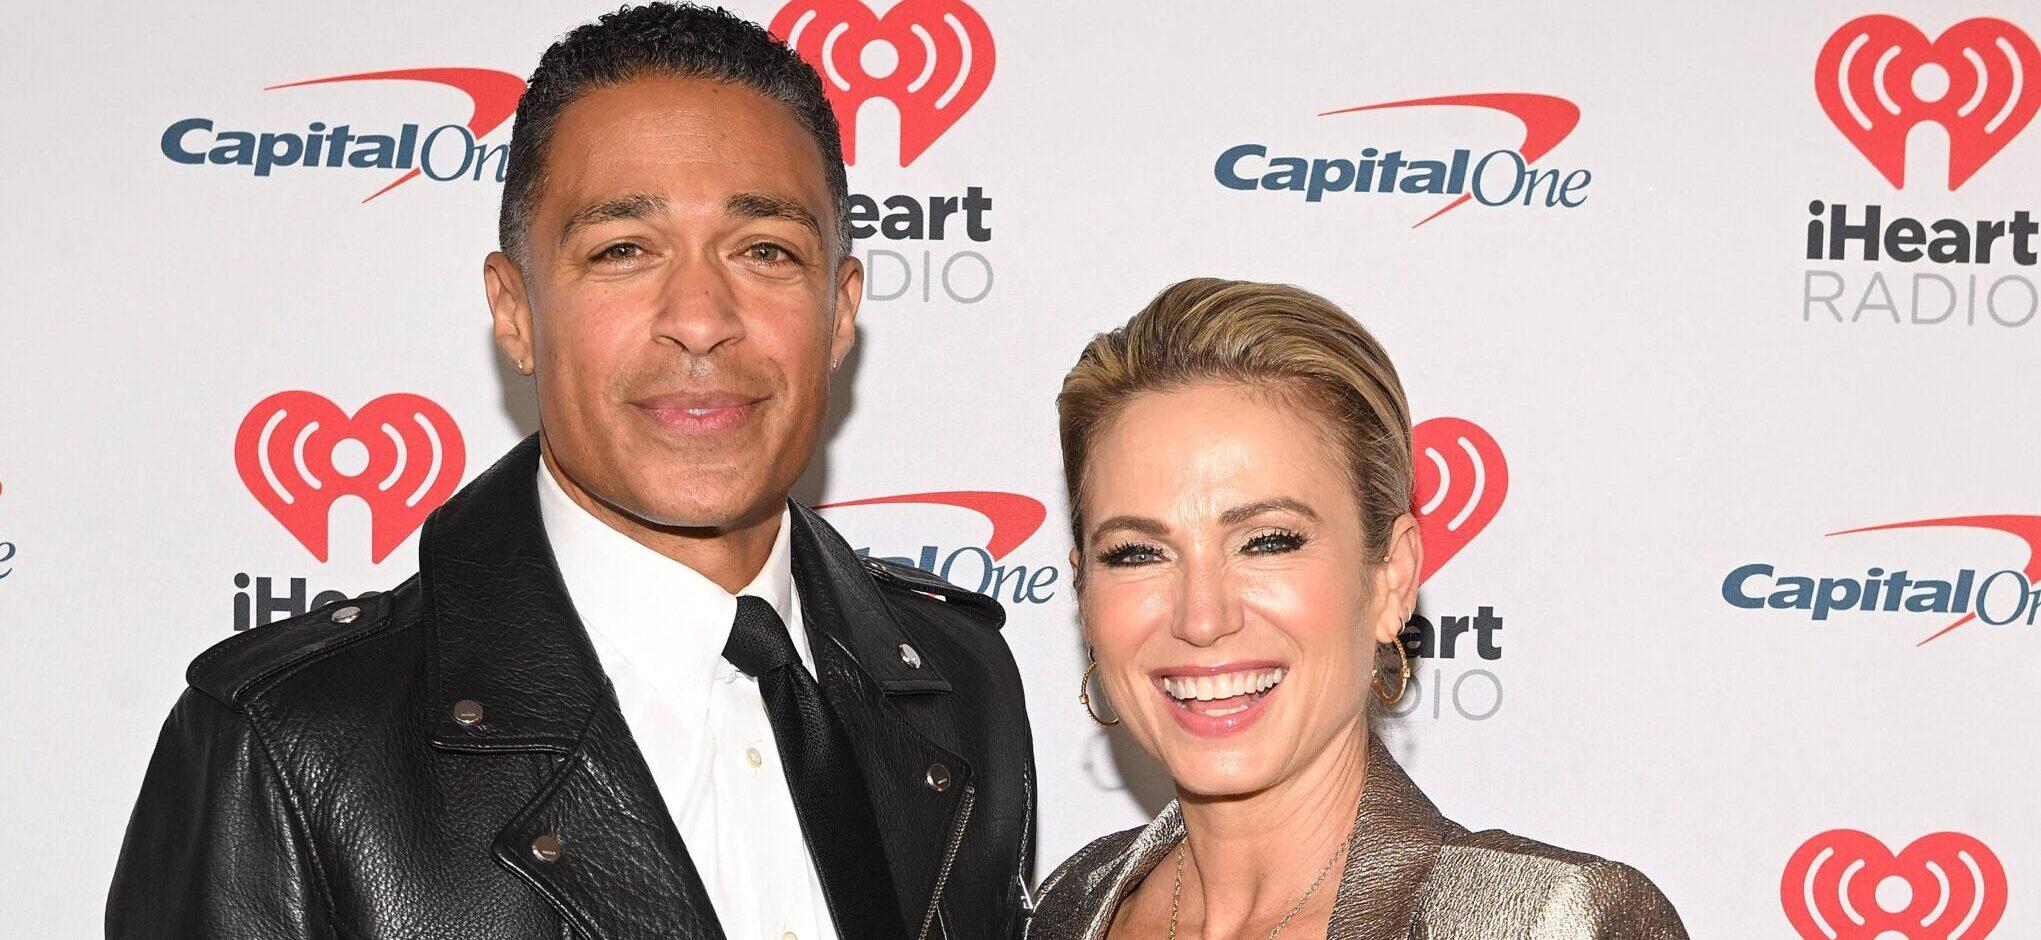 T.J. Holmes Claims His Journalism Career Was ‘Upended’ Over Amy Robach Romance